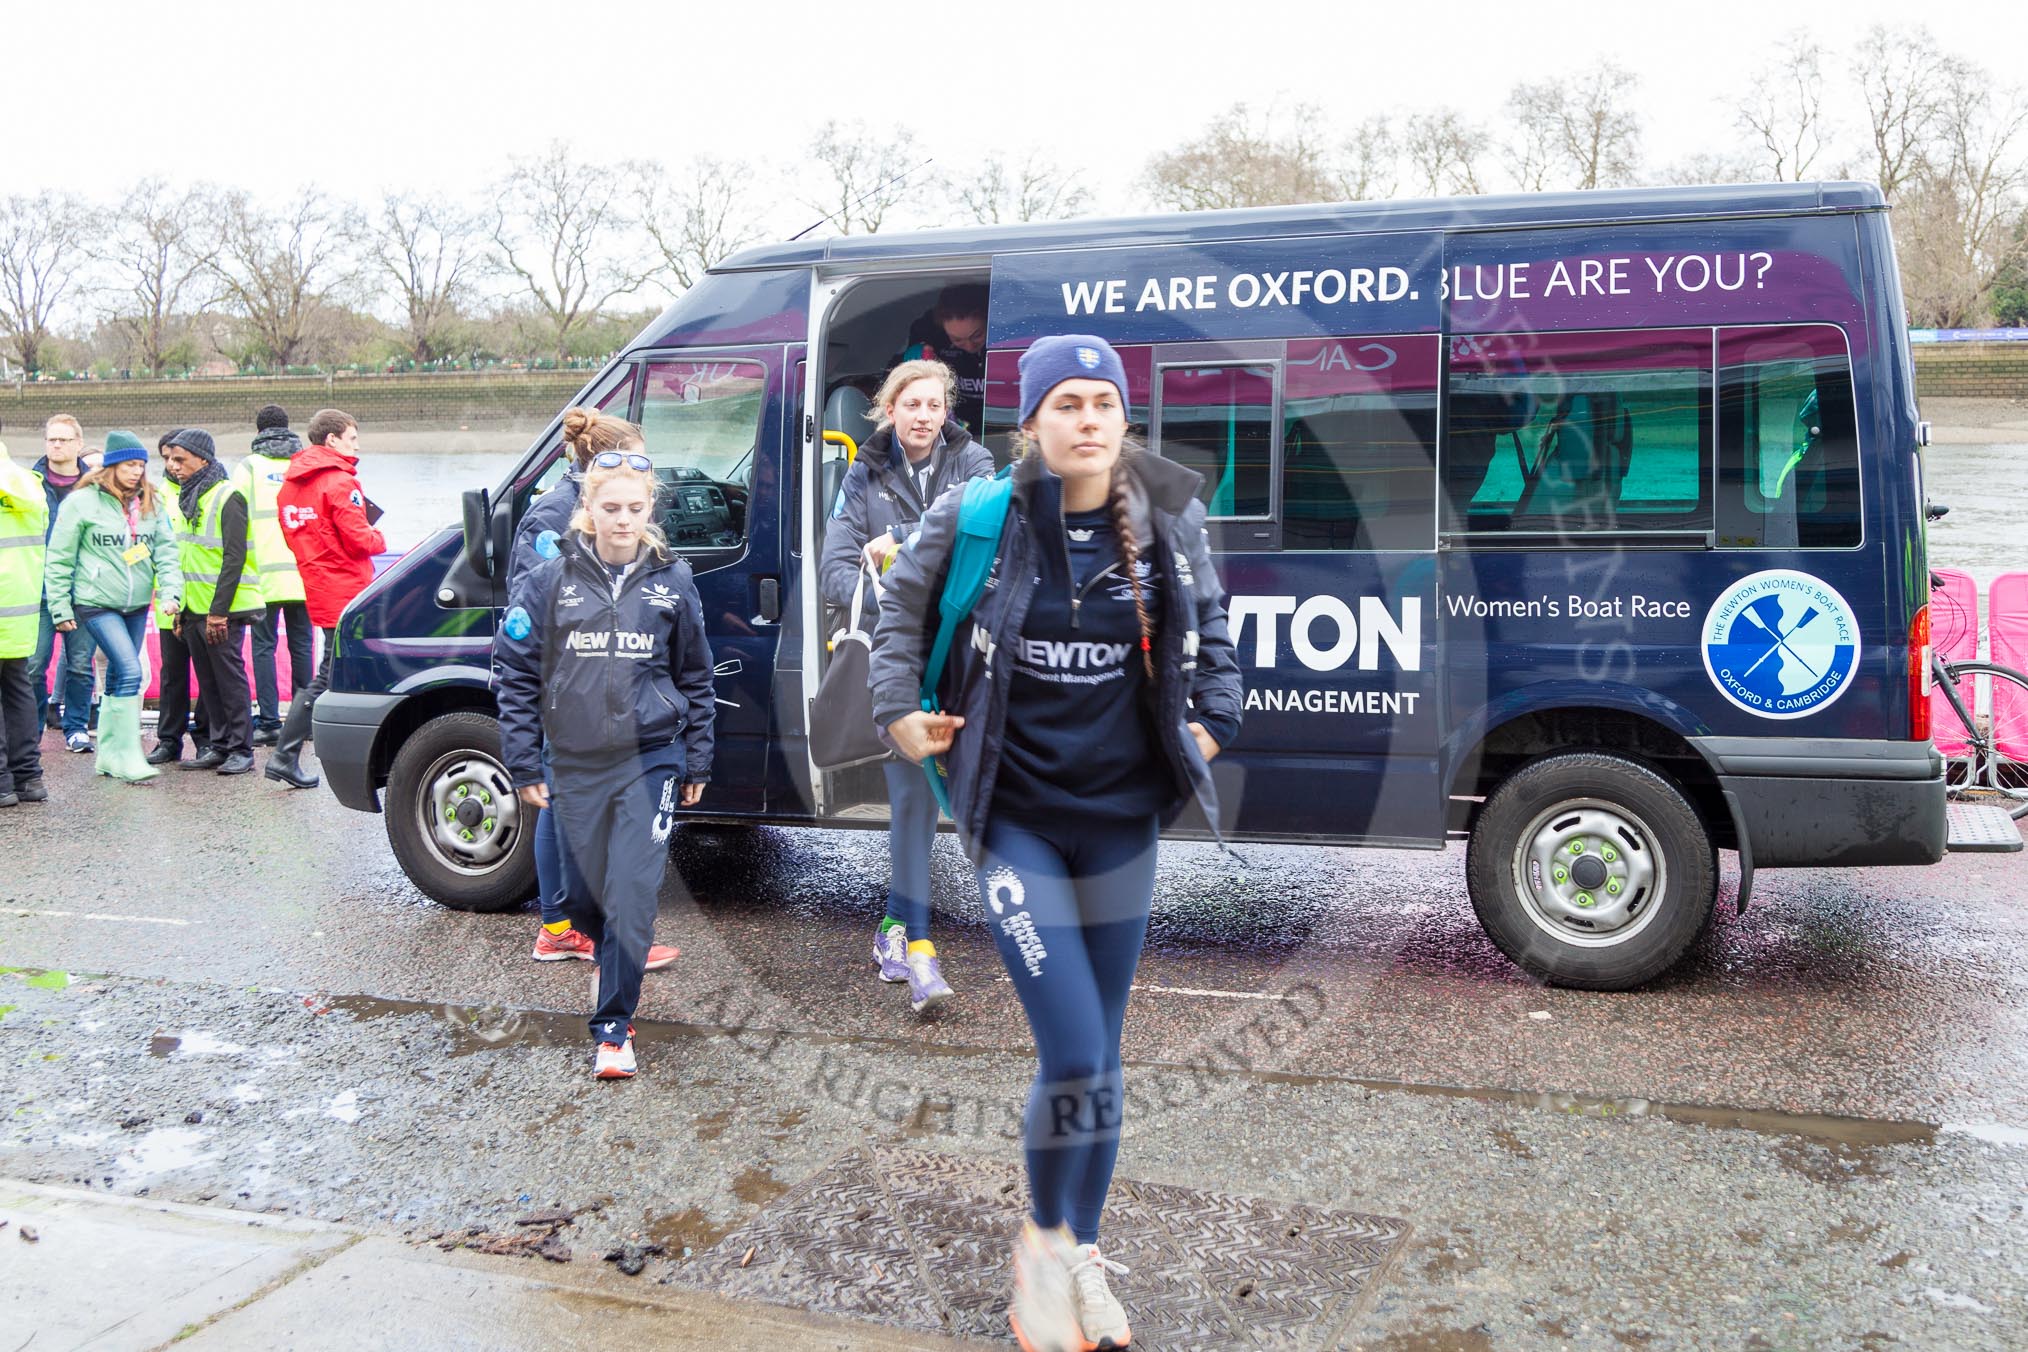 The Boat Race season 2016 -  The Cancer Research Women's Boat Race.
River Thames between Putney Bridge and Mortlake,
London SW15,

United Kingdom,
on 27 March 2016 at 11:34, image #22